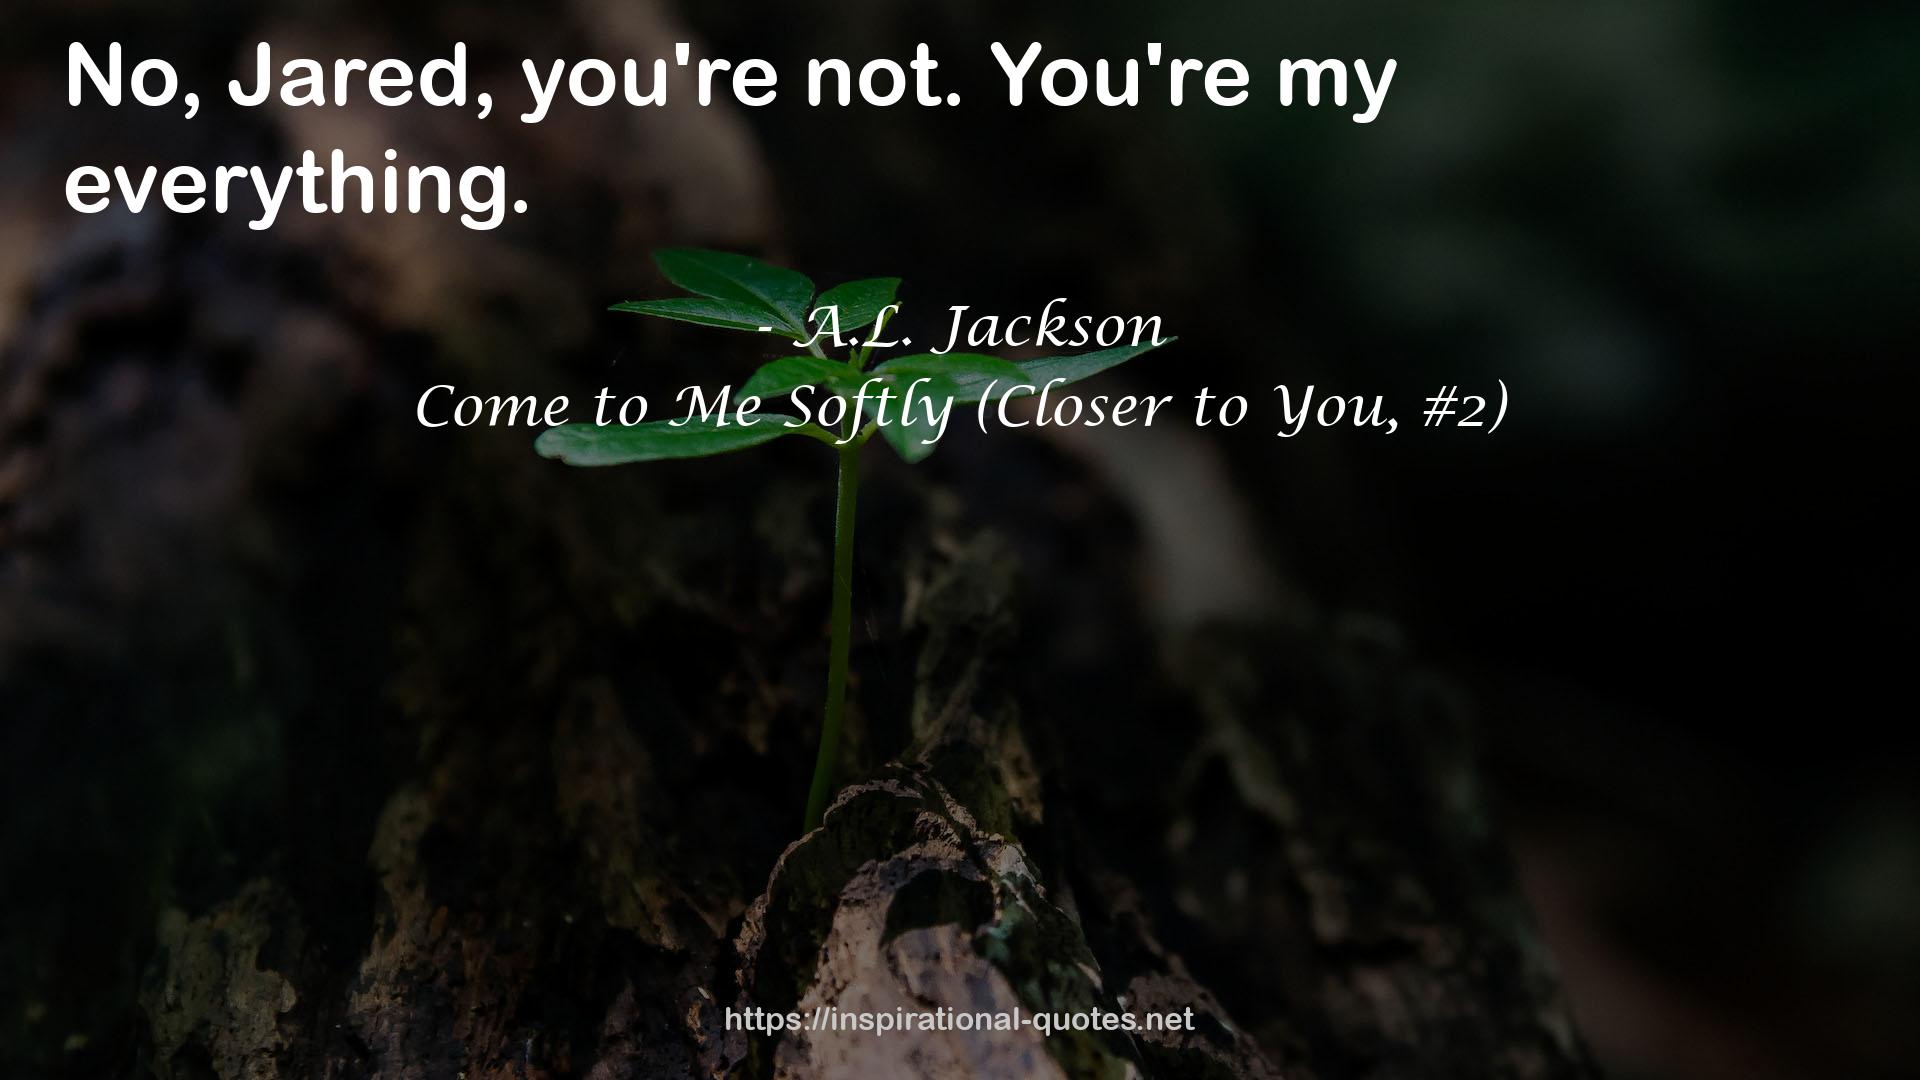 Come to Me Softly (Closer to You, #2) QUOTES